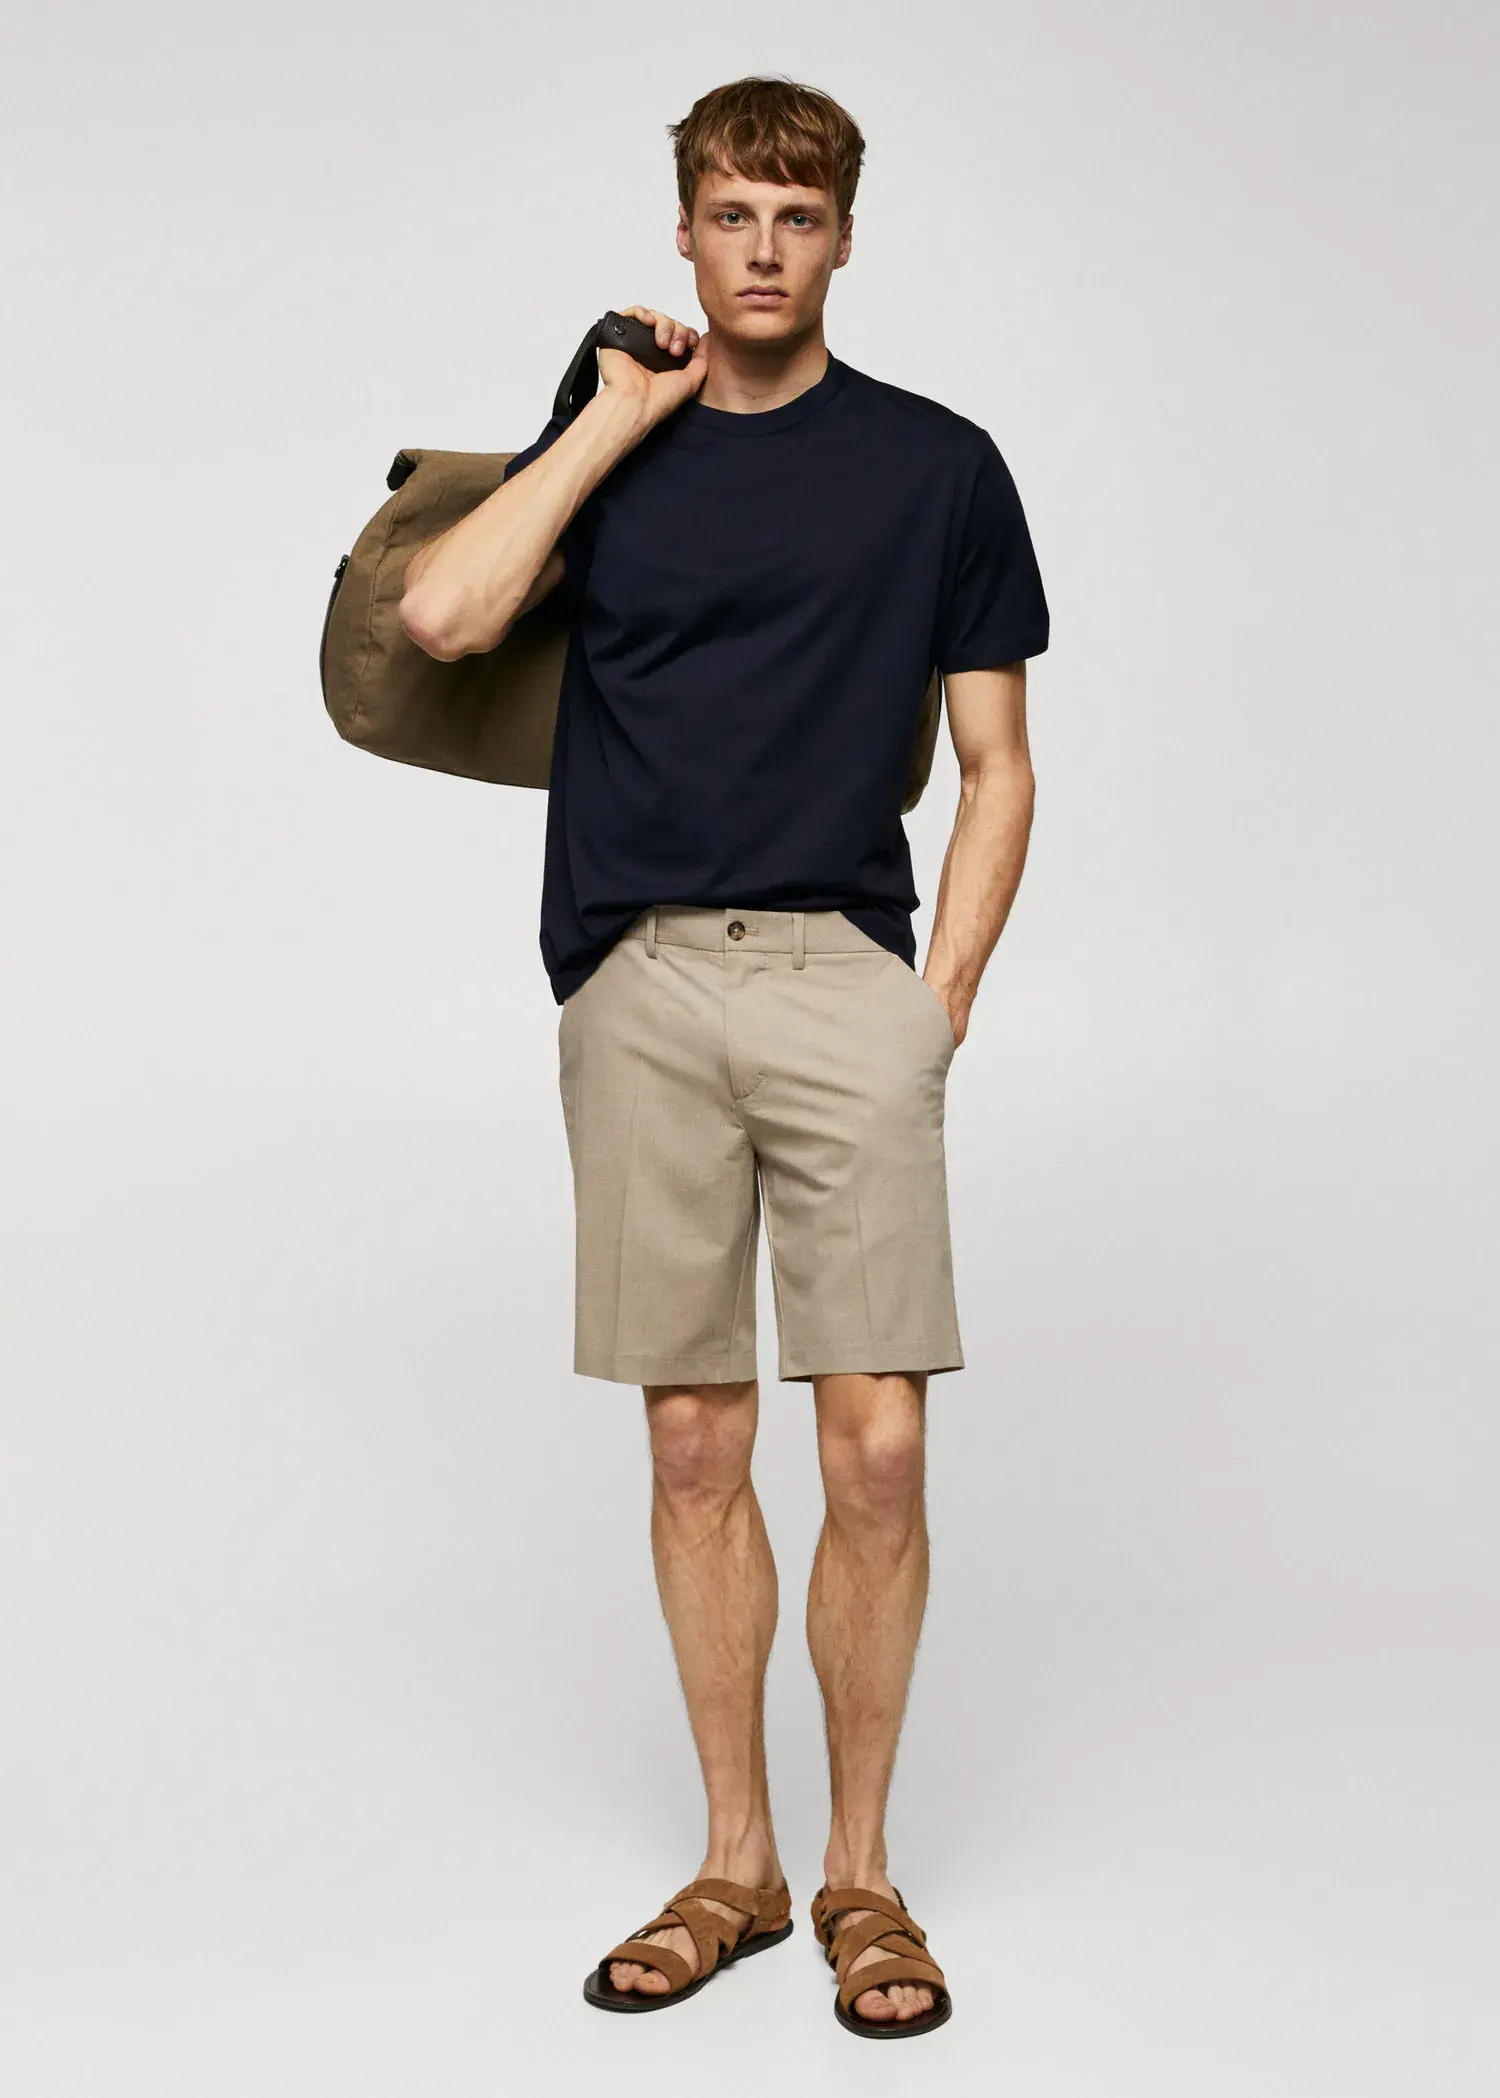 Mango Mercerized regular-fit t-shirt. a young man in shorts and a black t-shirt. 